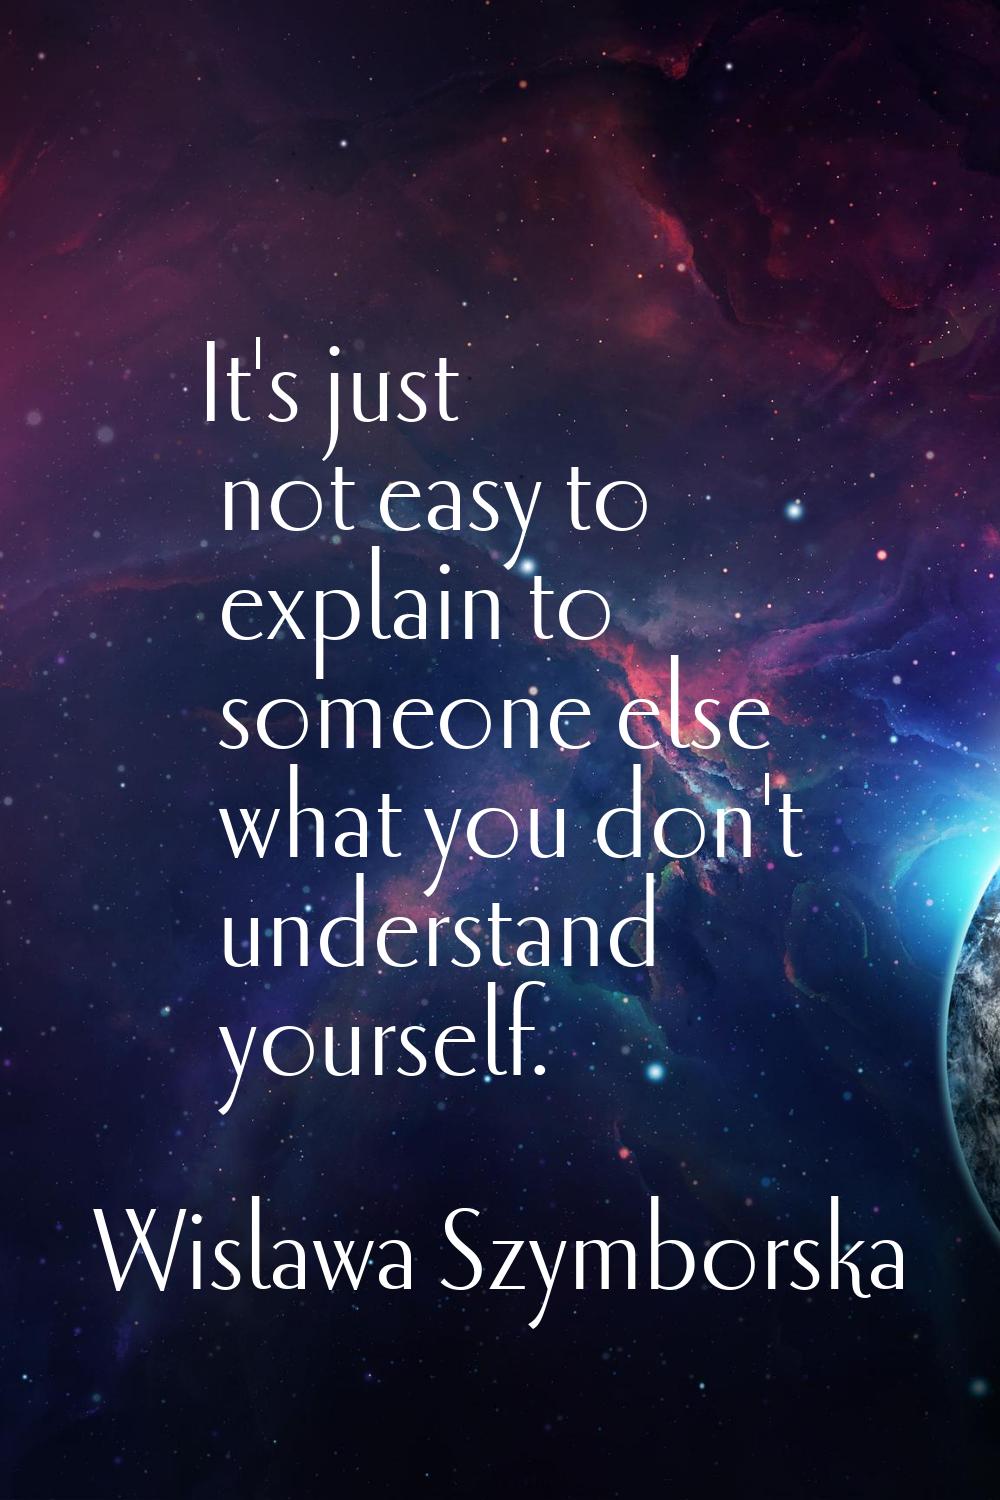 It's just not easy to explain to someone else what you don't understand yourself.